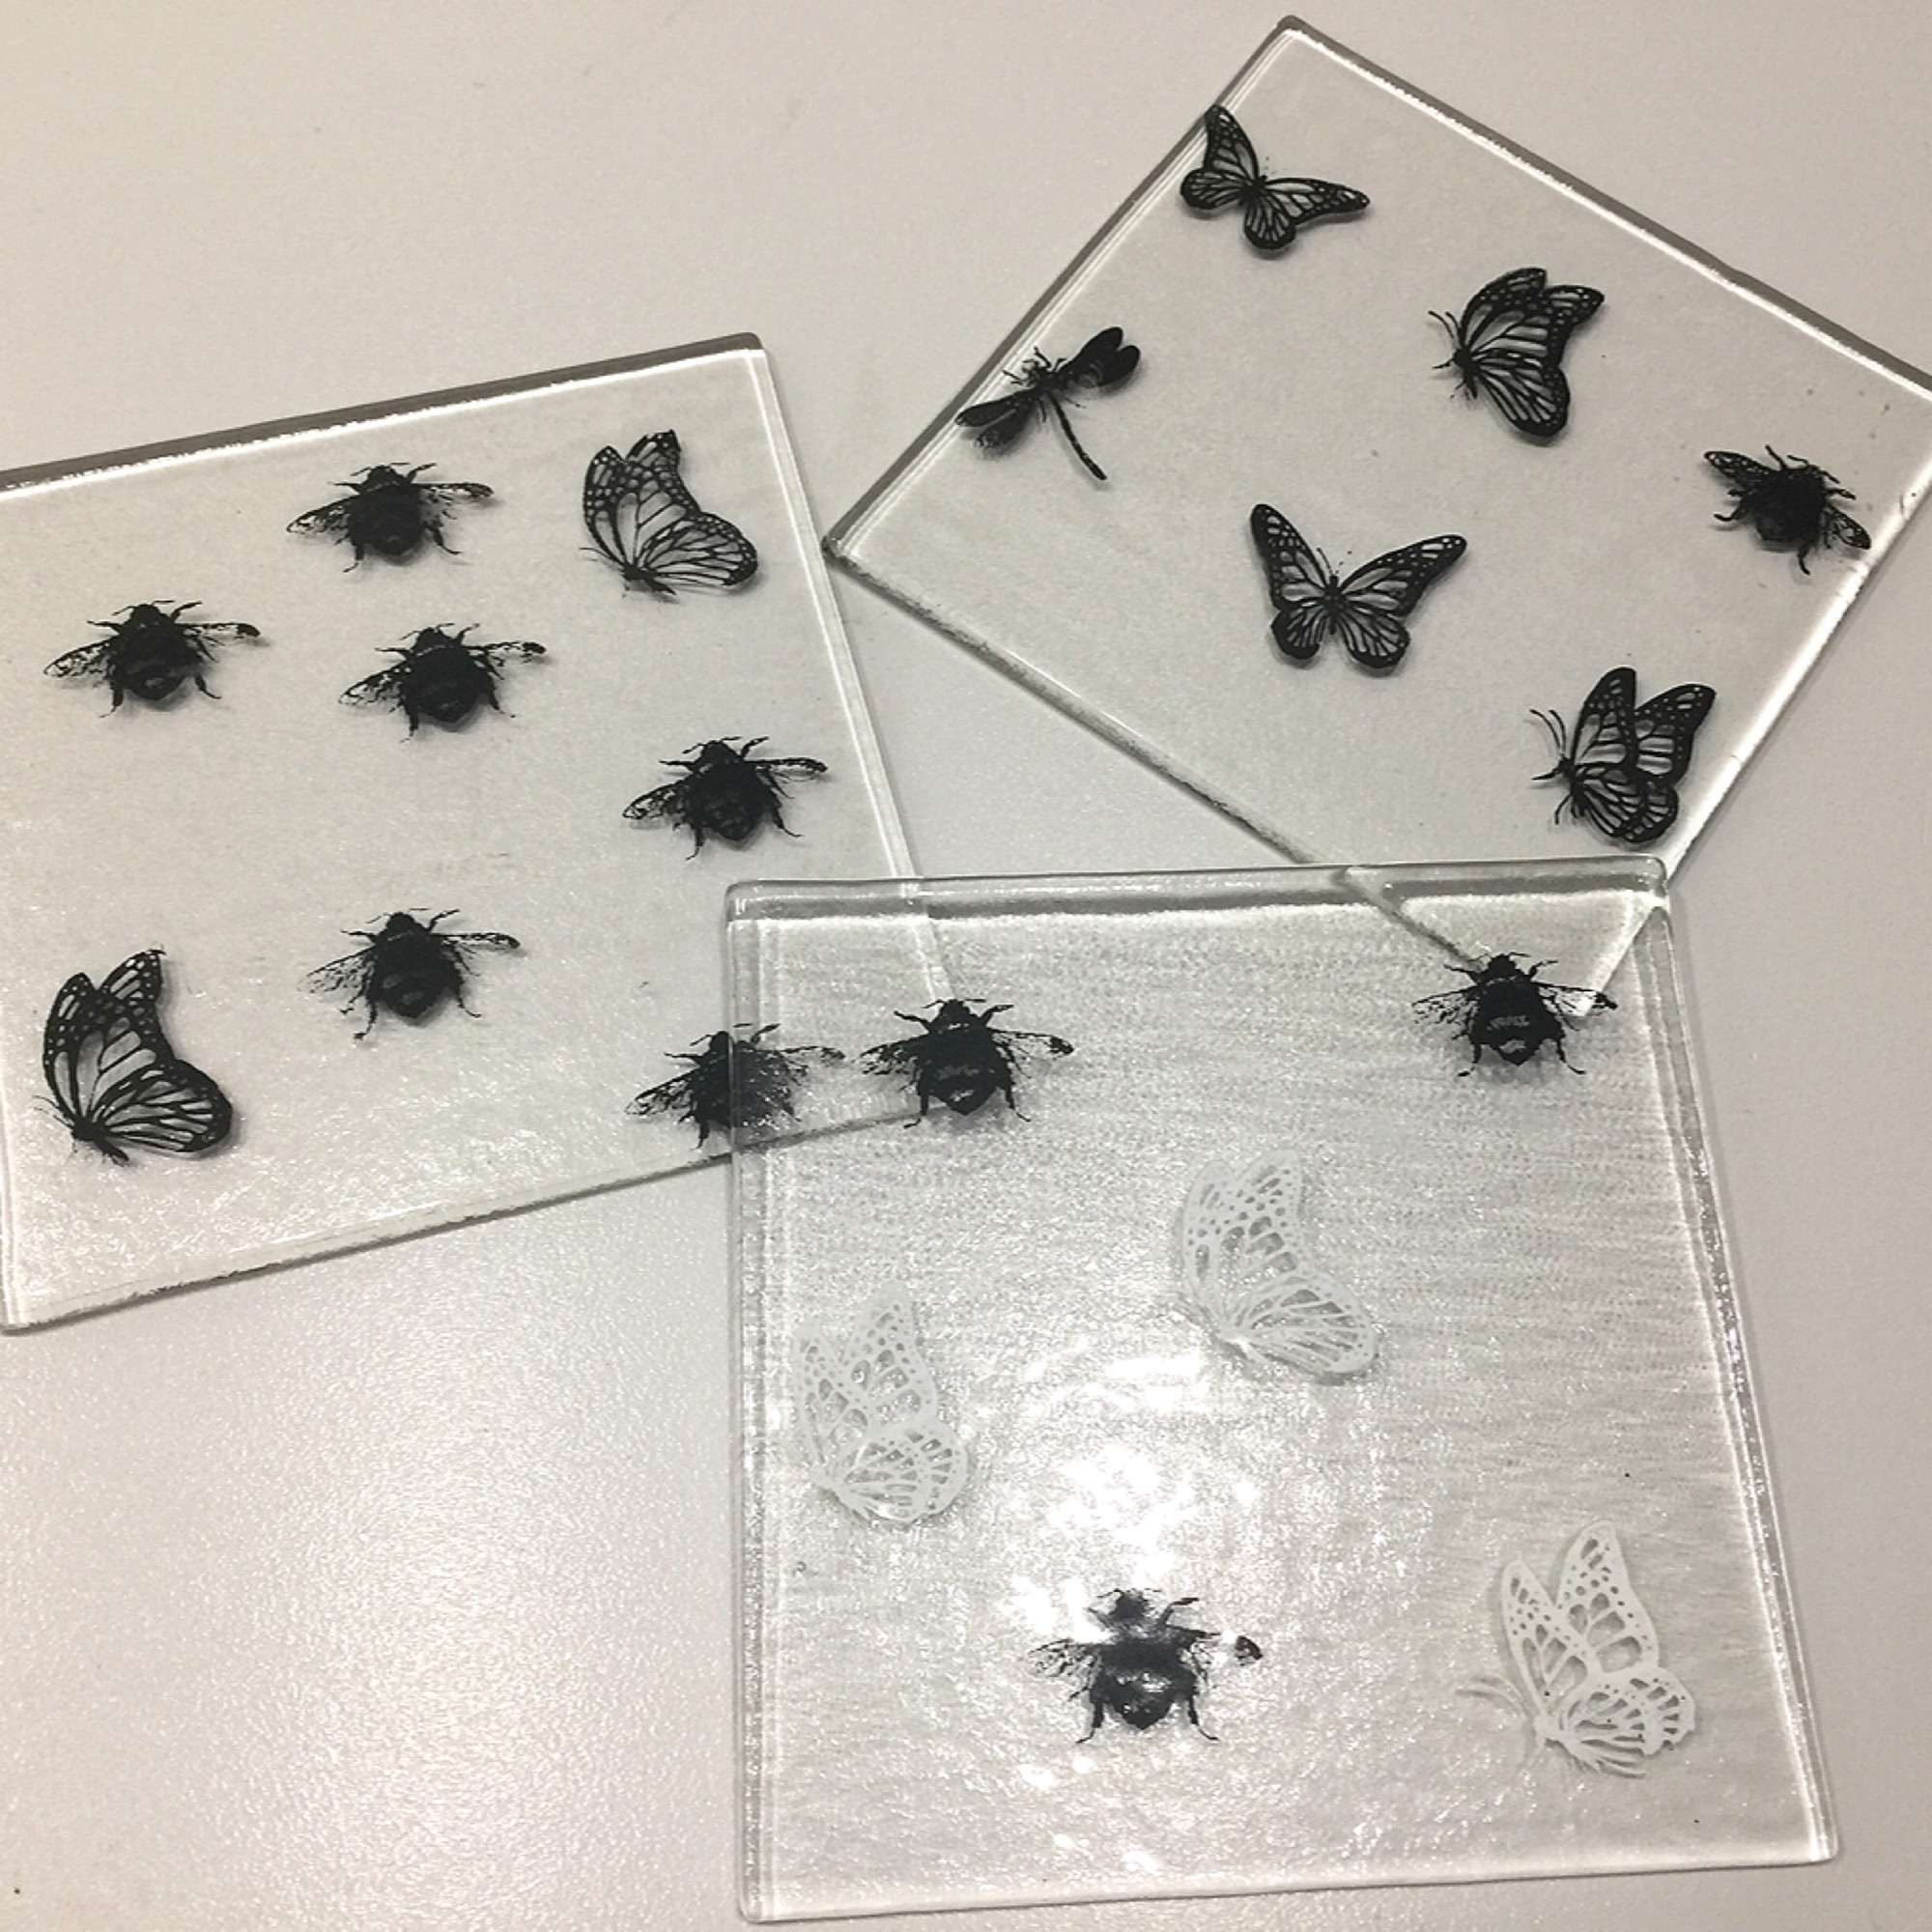 Black and white screen prints on glass coasters